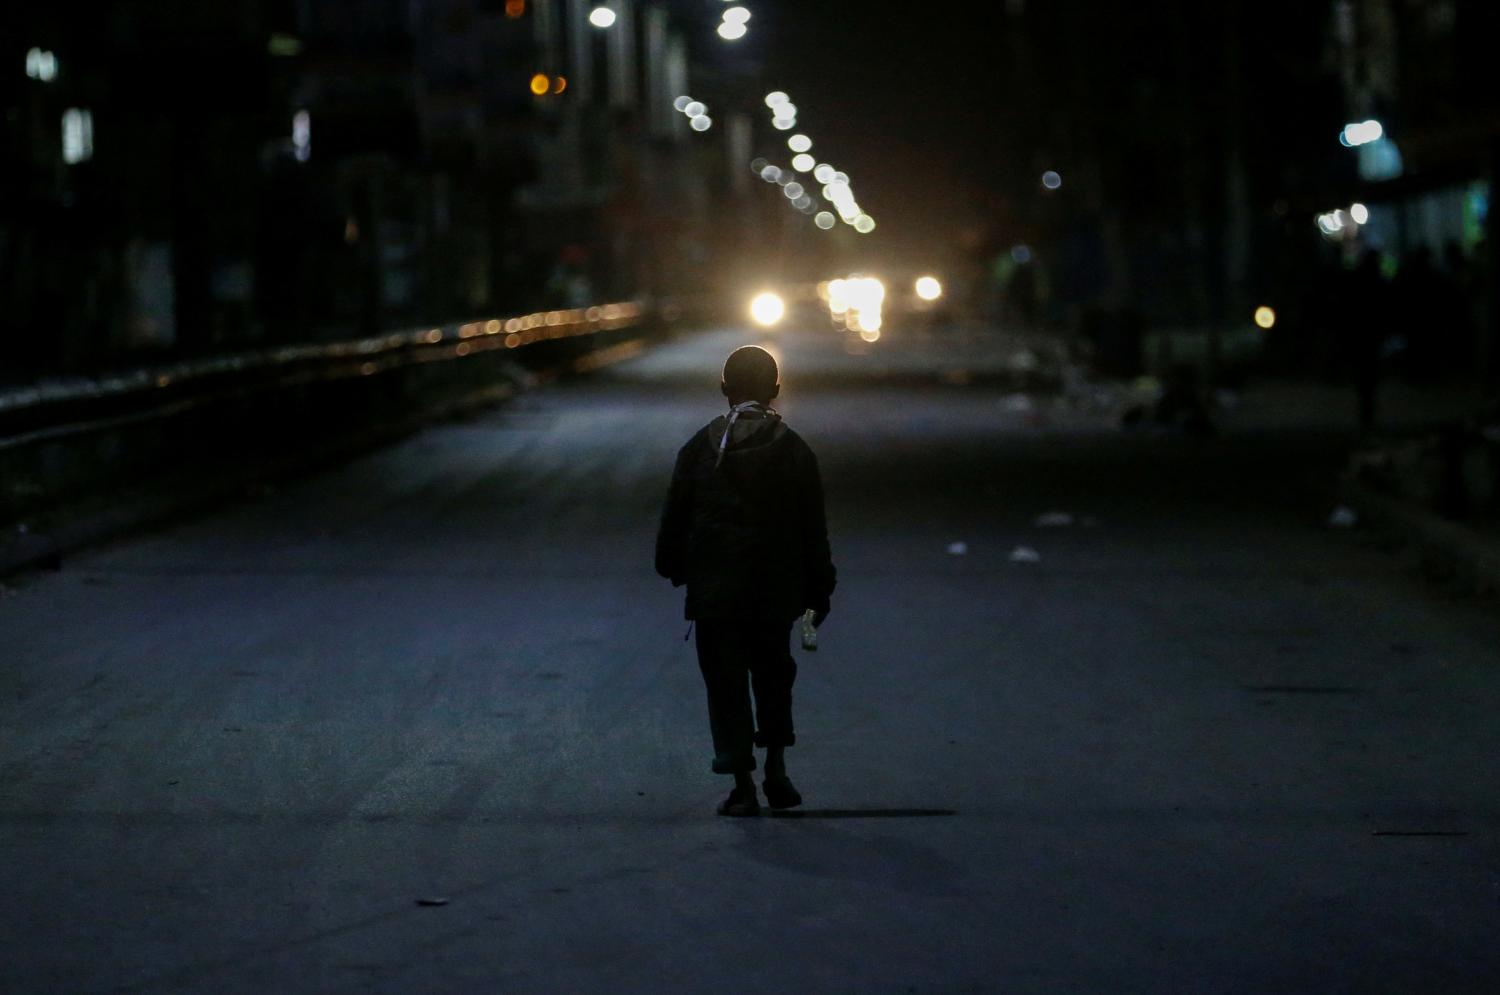 A child walks along the street at the start of the lockdown restrictions set by the government to prevent the rampant spread of the coronavirus disease (COVID-19), in Eastleigh district of Nairobi, Kenya May 6, 2020. REUTERS/Thomas Mukoya